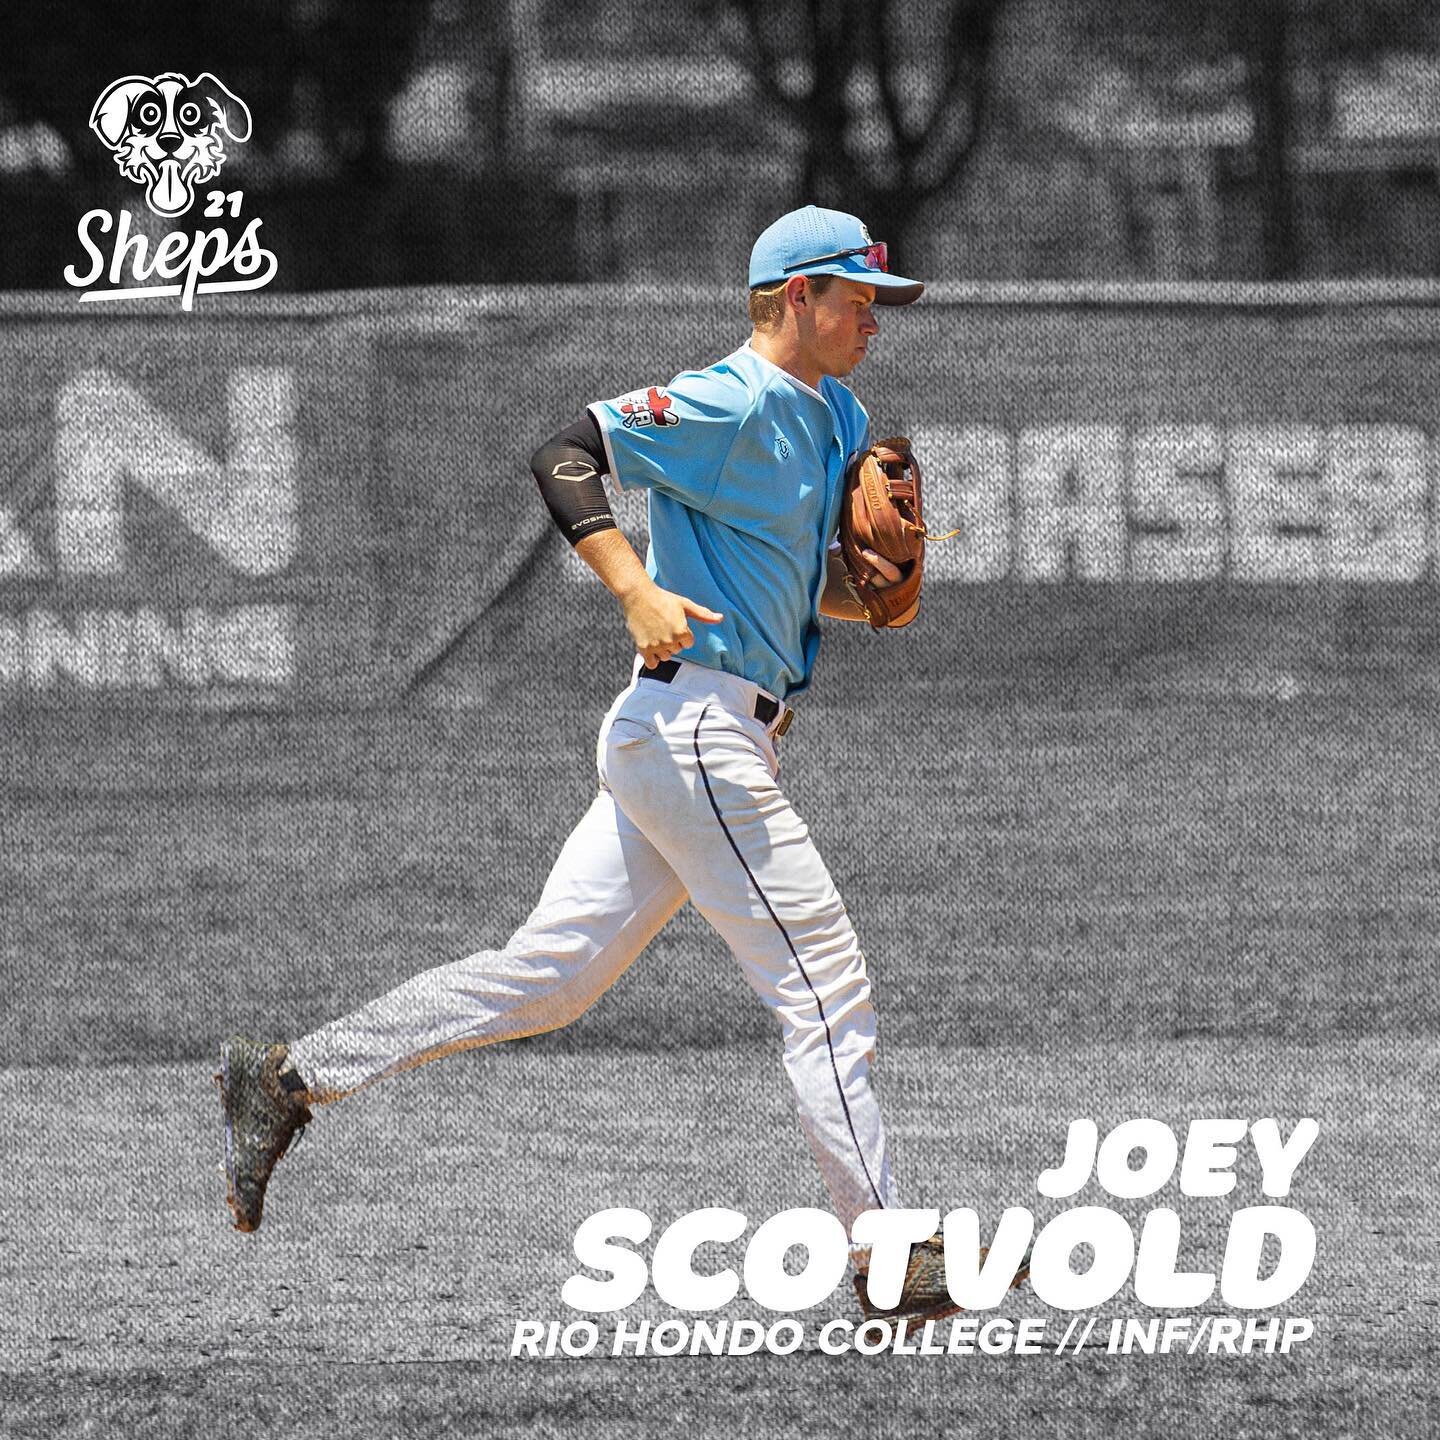 Running out there again in Carolina blue is @j.scotvold!! Can&rsquo;t say enough good things about this guy and we&rsquo;re excited to have him back for another summer. #Sheps21 #goDawgs